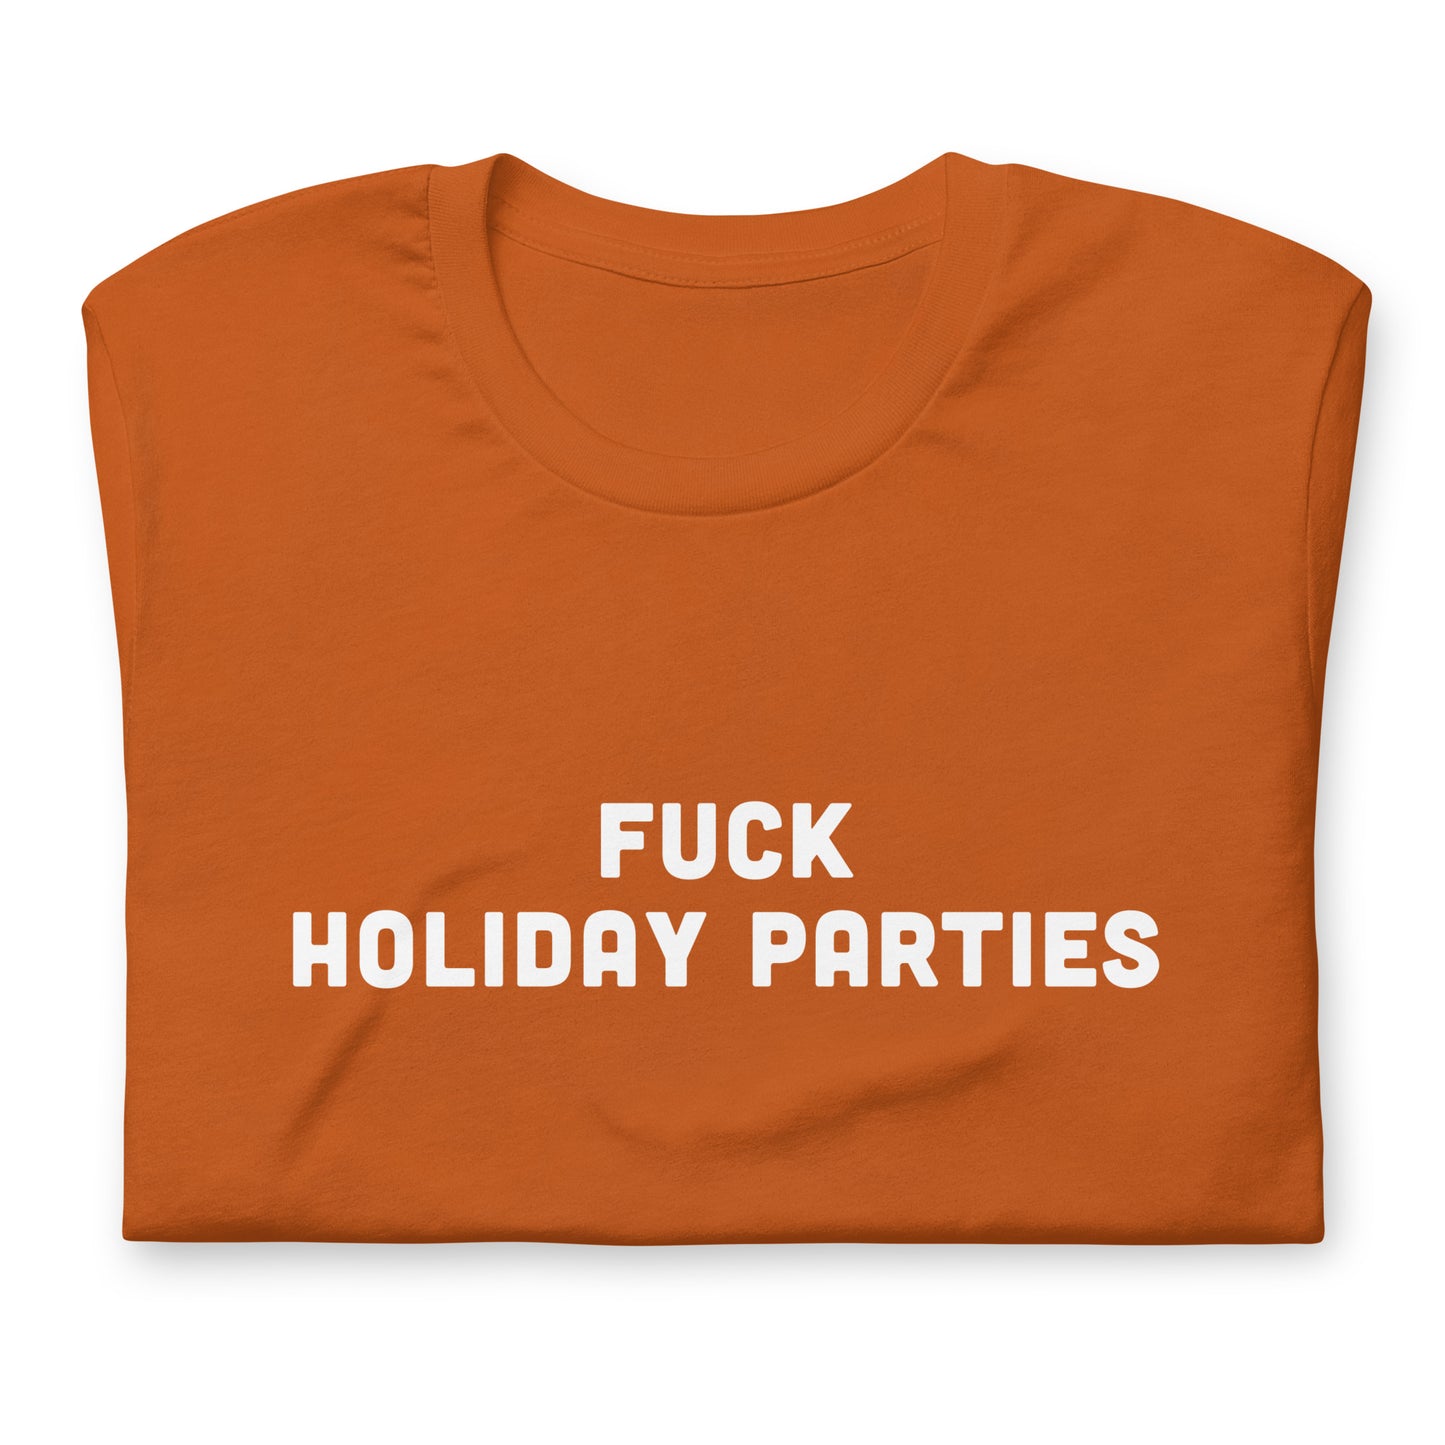 Fuck Holiday Parties T-Shirt Size M Color Navy